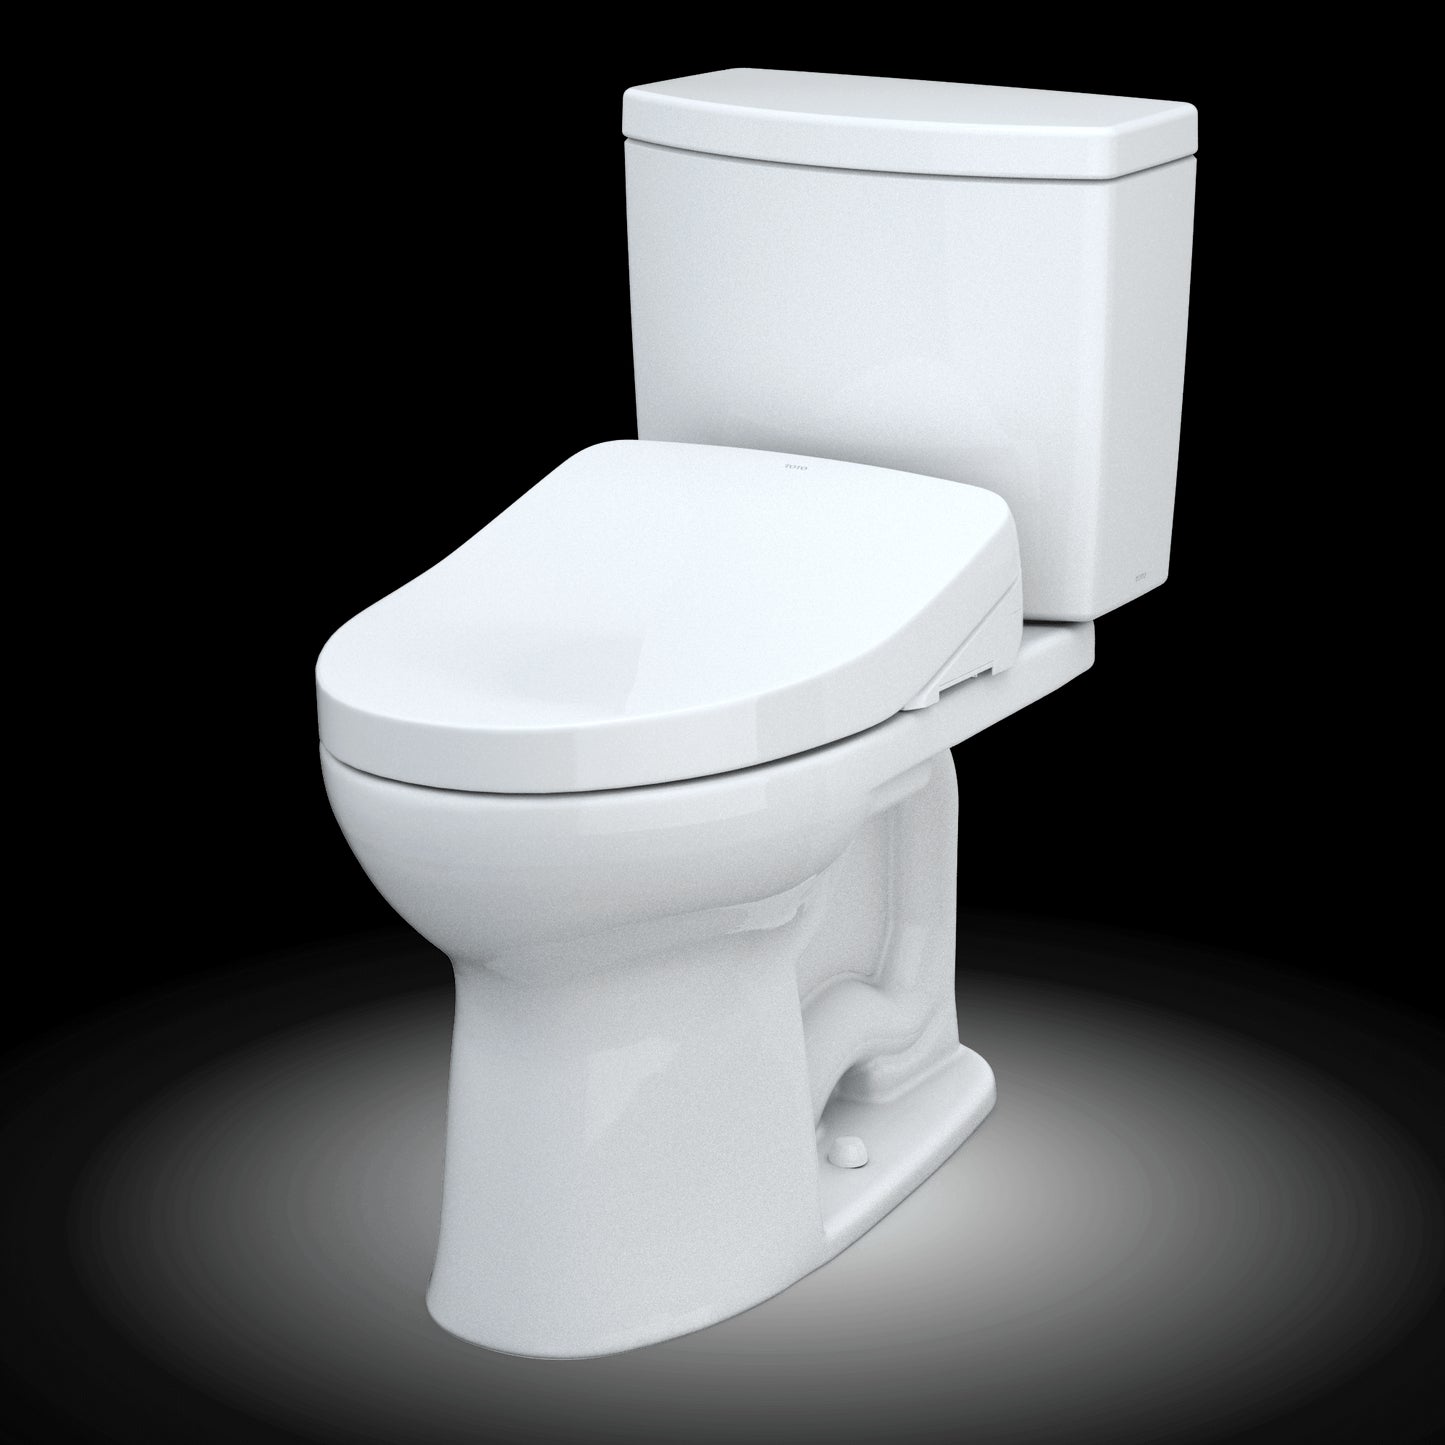 TOTO WASHLET+ Drake II 1G Two-Piece 1.0 GPF Universal Height Toilet S550e Contemporary Bidet Seat with Auto Flush Option - MW4543056CUFG(A)#01